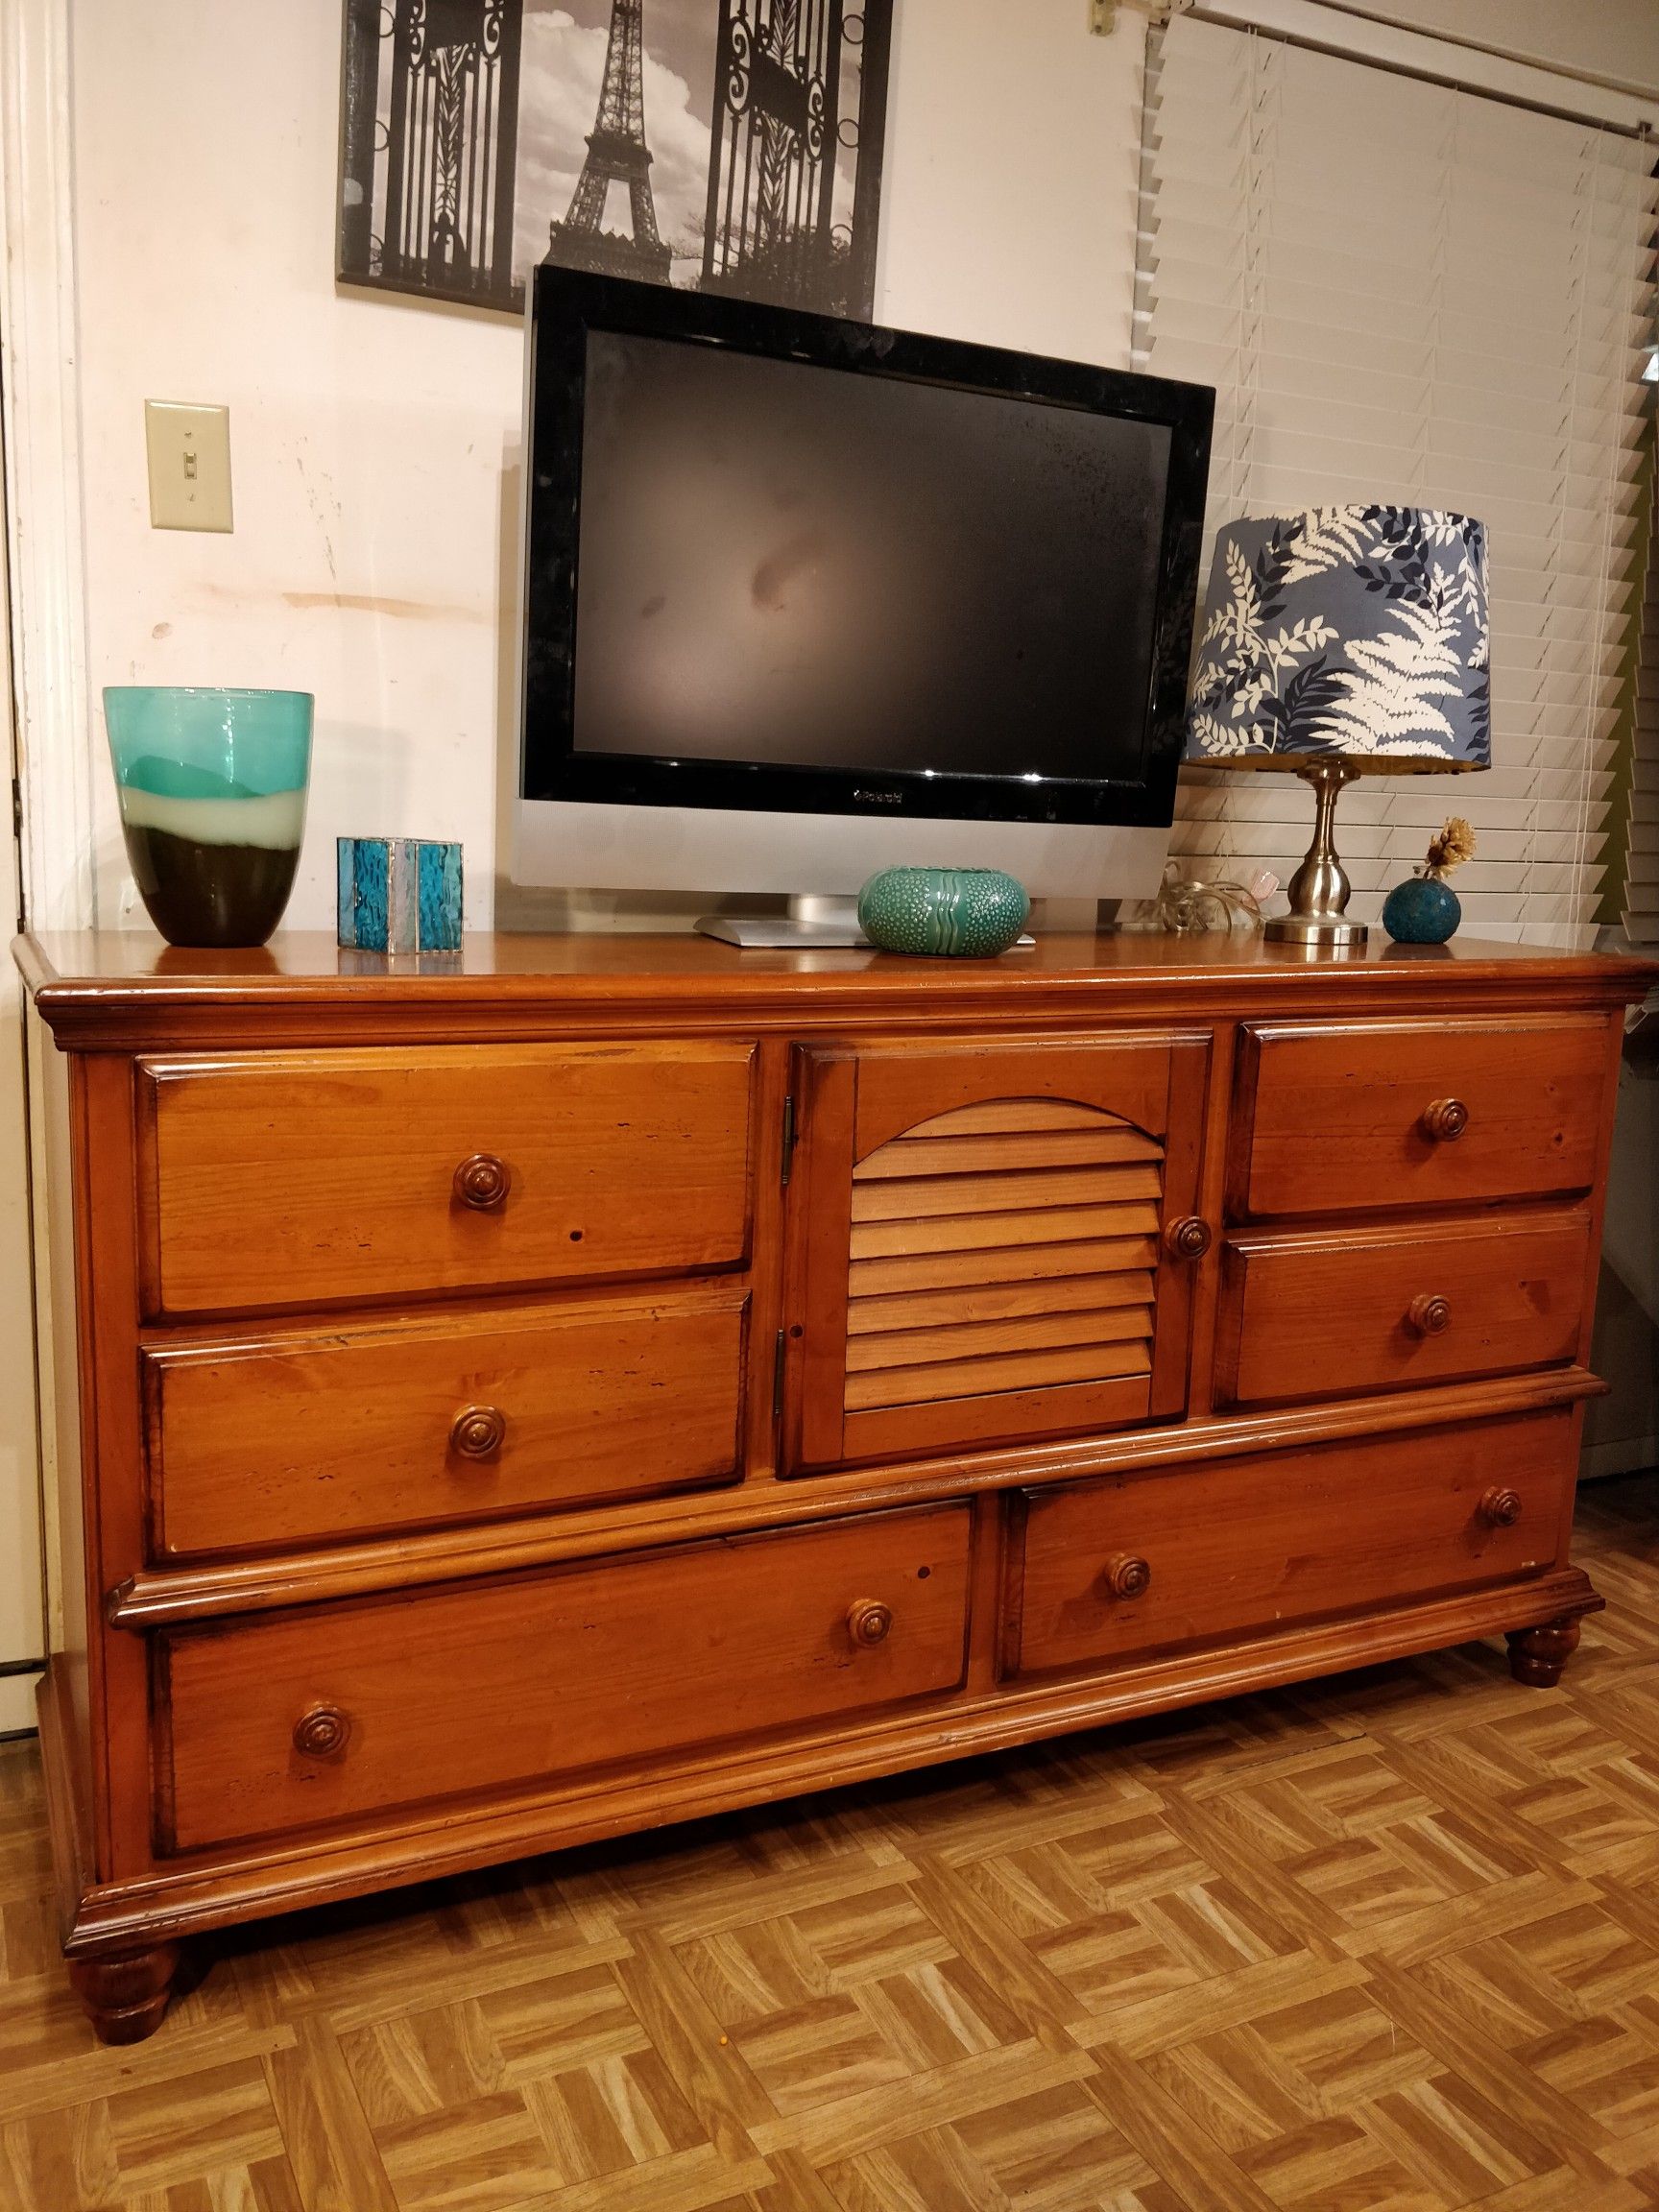 Nice solid wood ROTTA FURNITURE dresser with 6 drawers and cabinet in very good condition, all drawers sliding smoothly. L68"*w18.5"*H35.5"